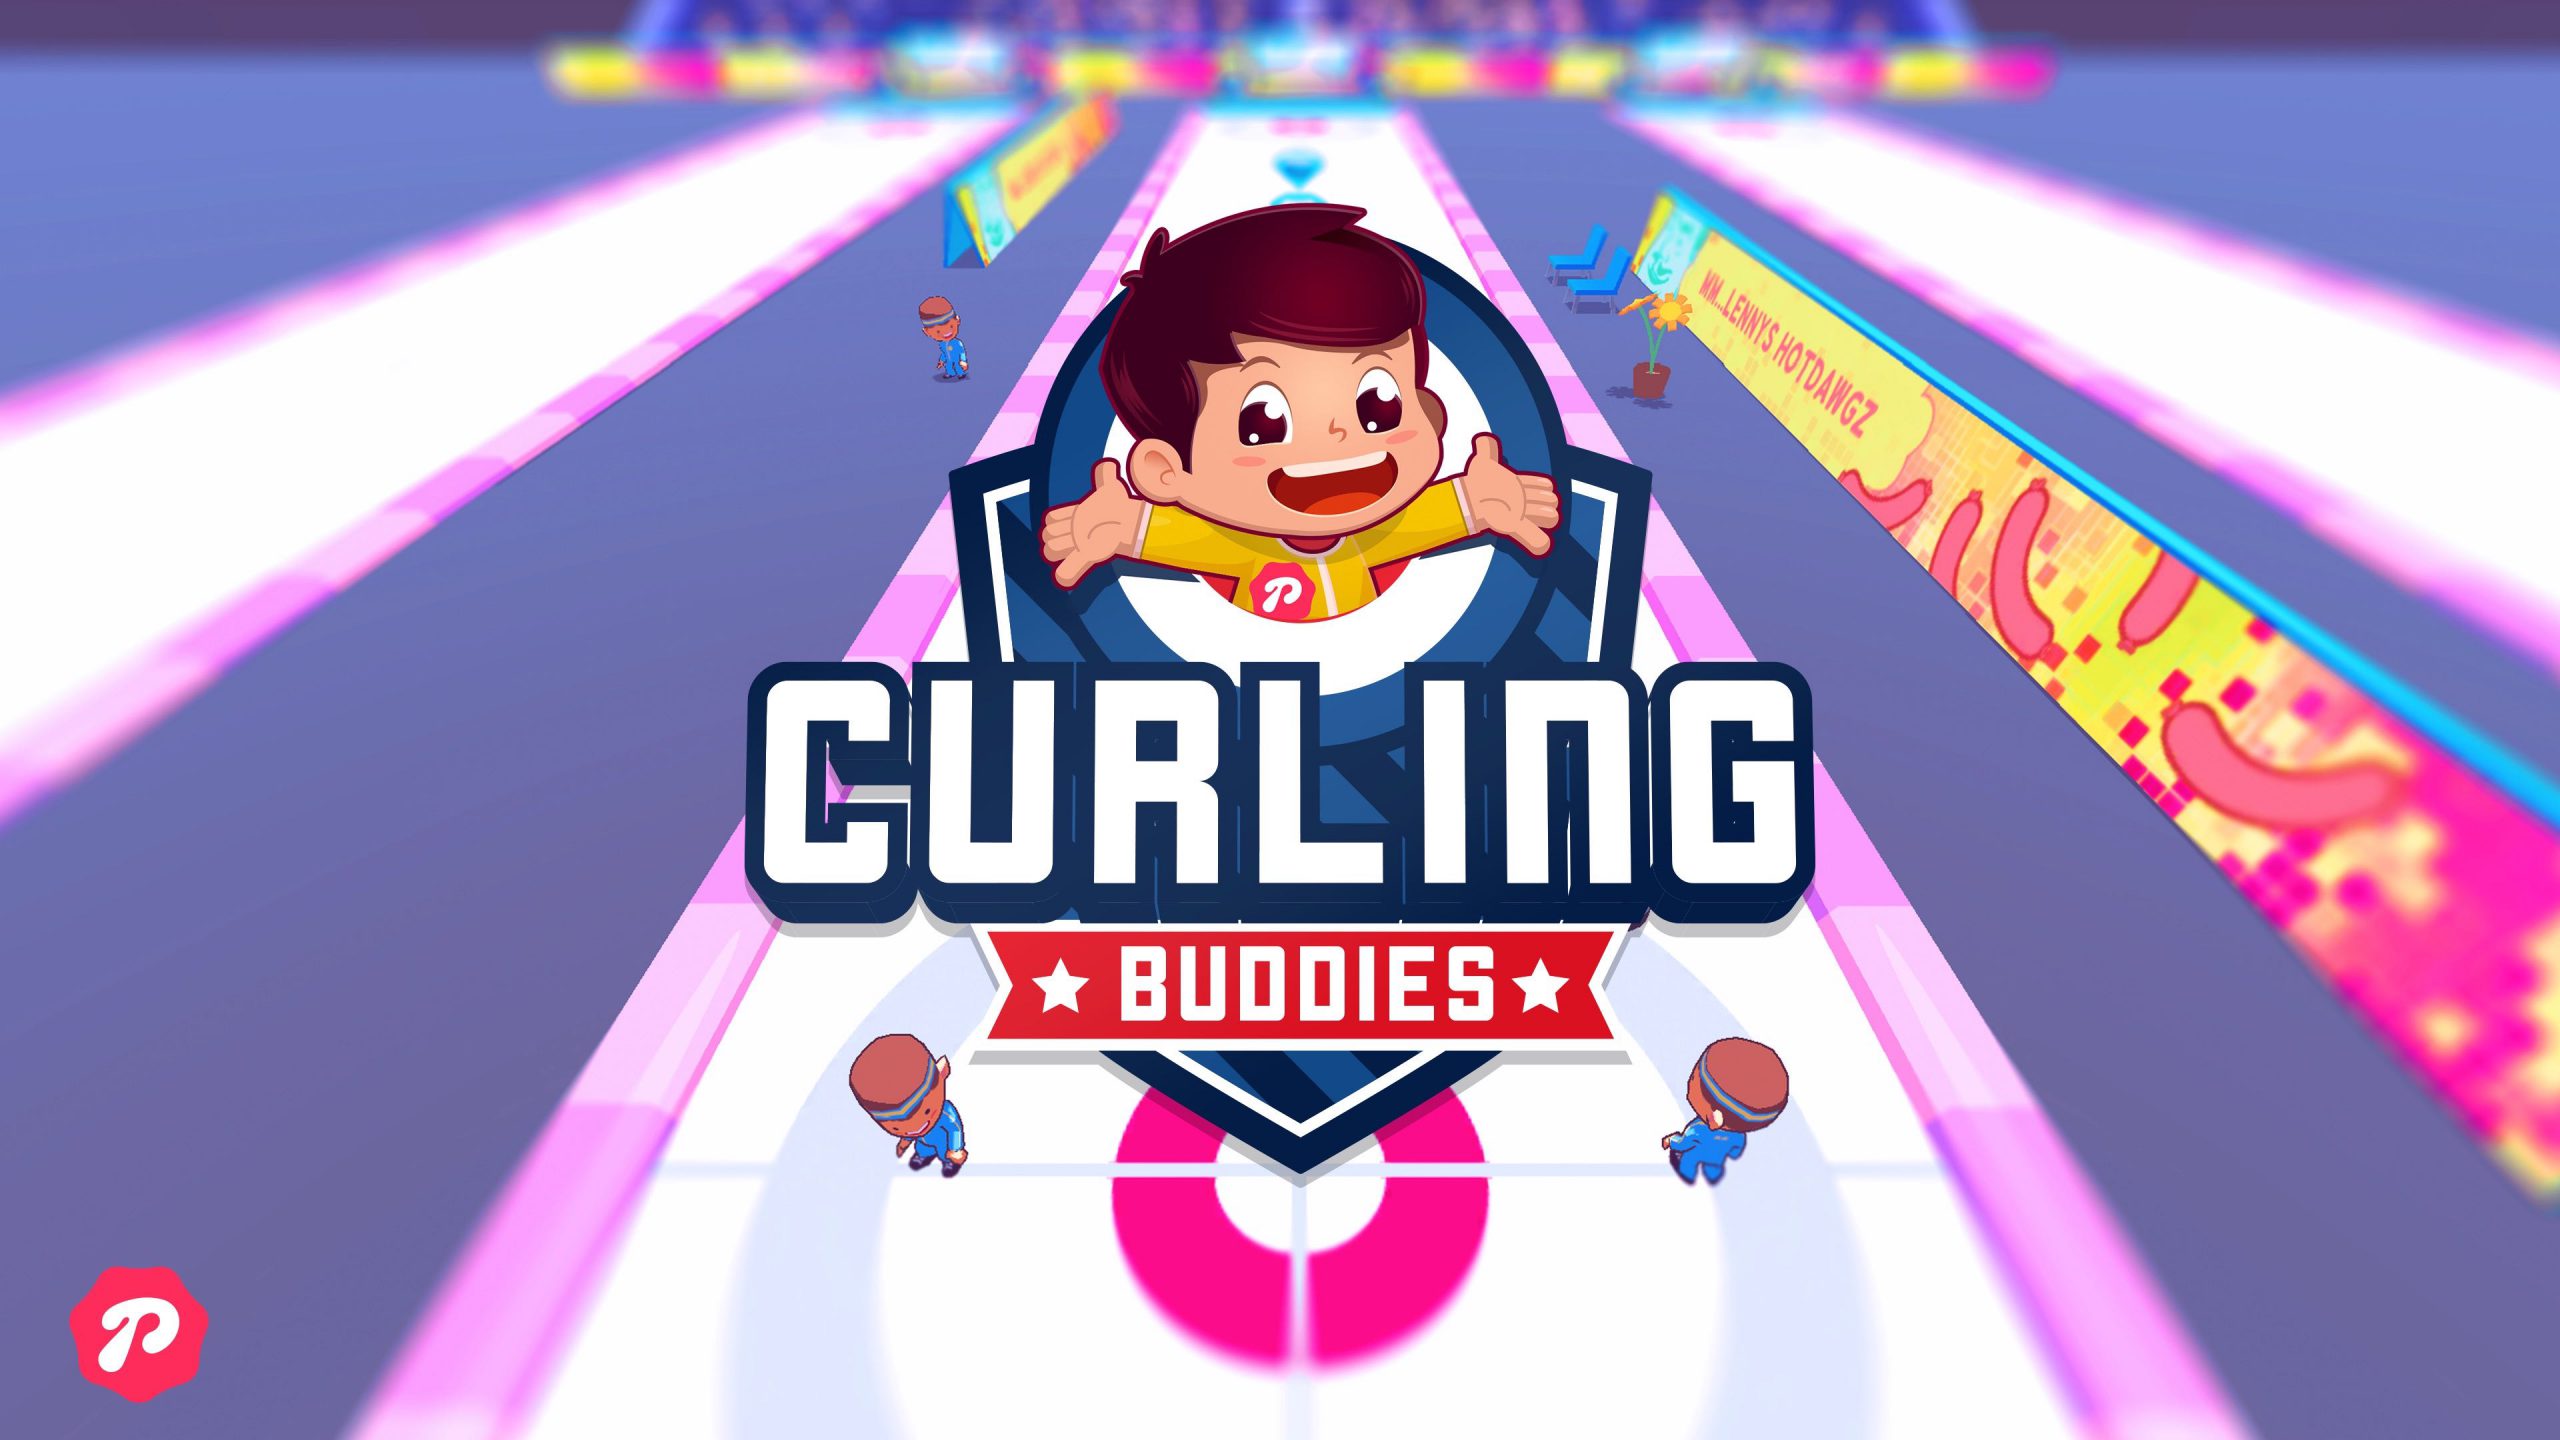 Curling Buddies is a bonkers, zombie-infested twist on curling